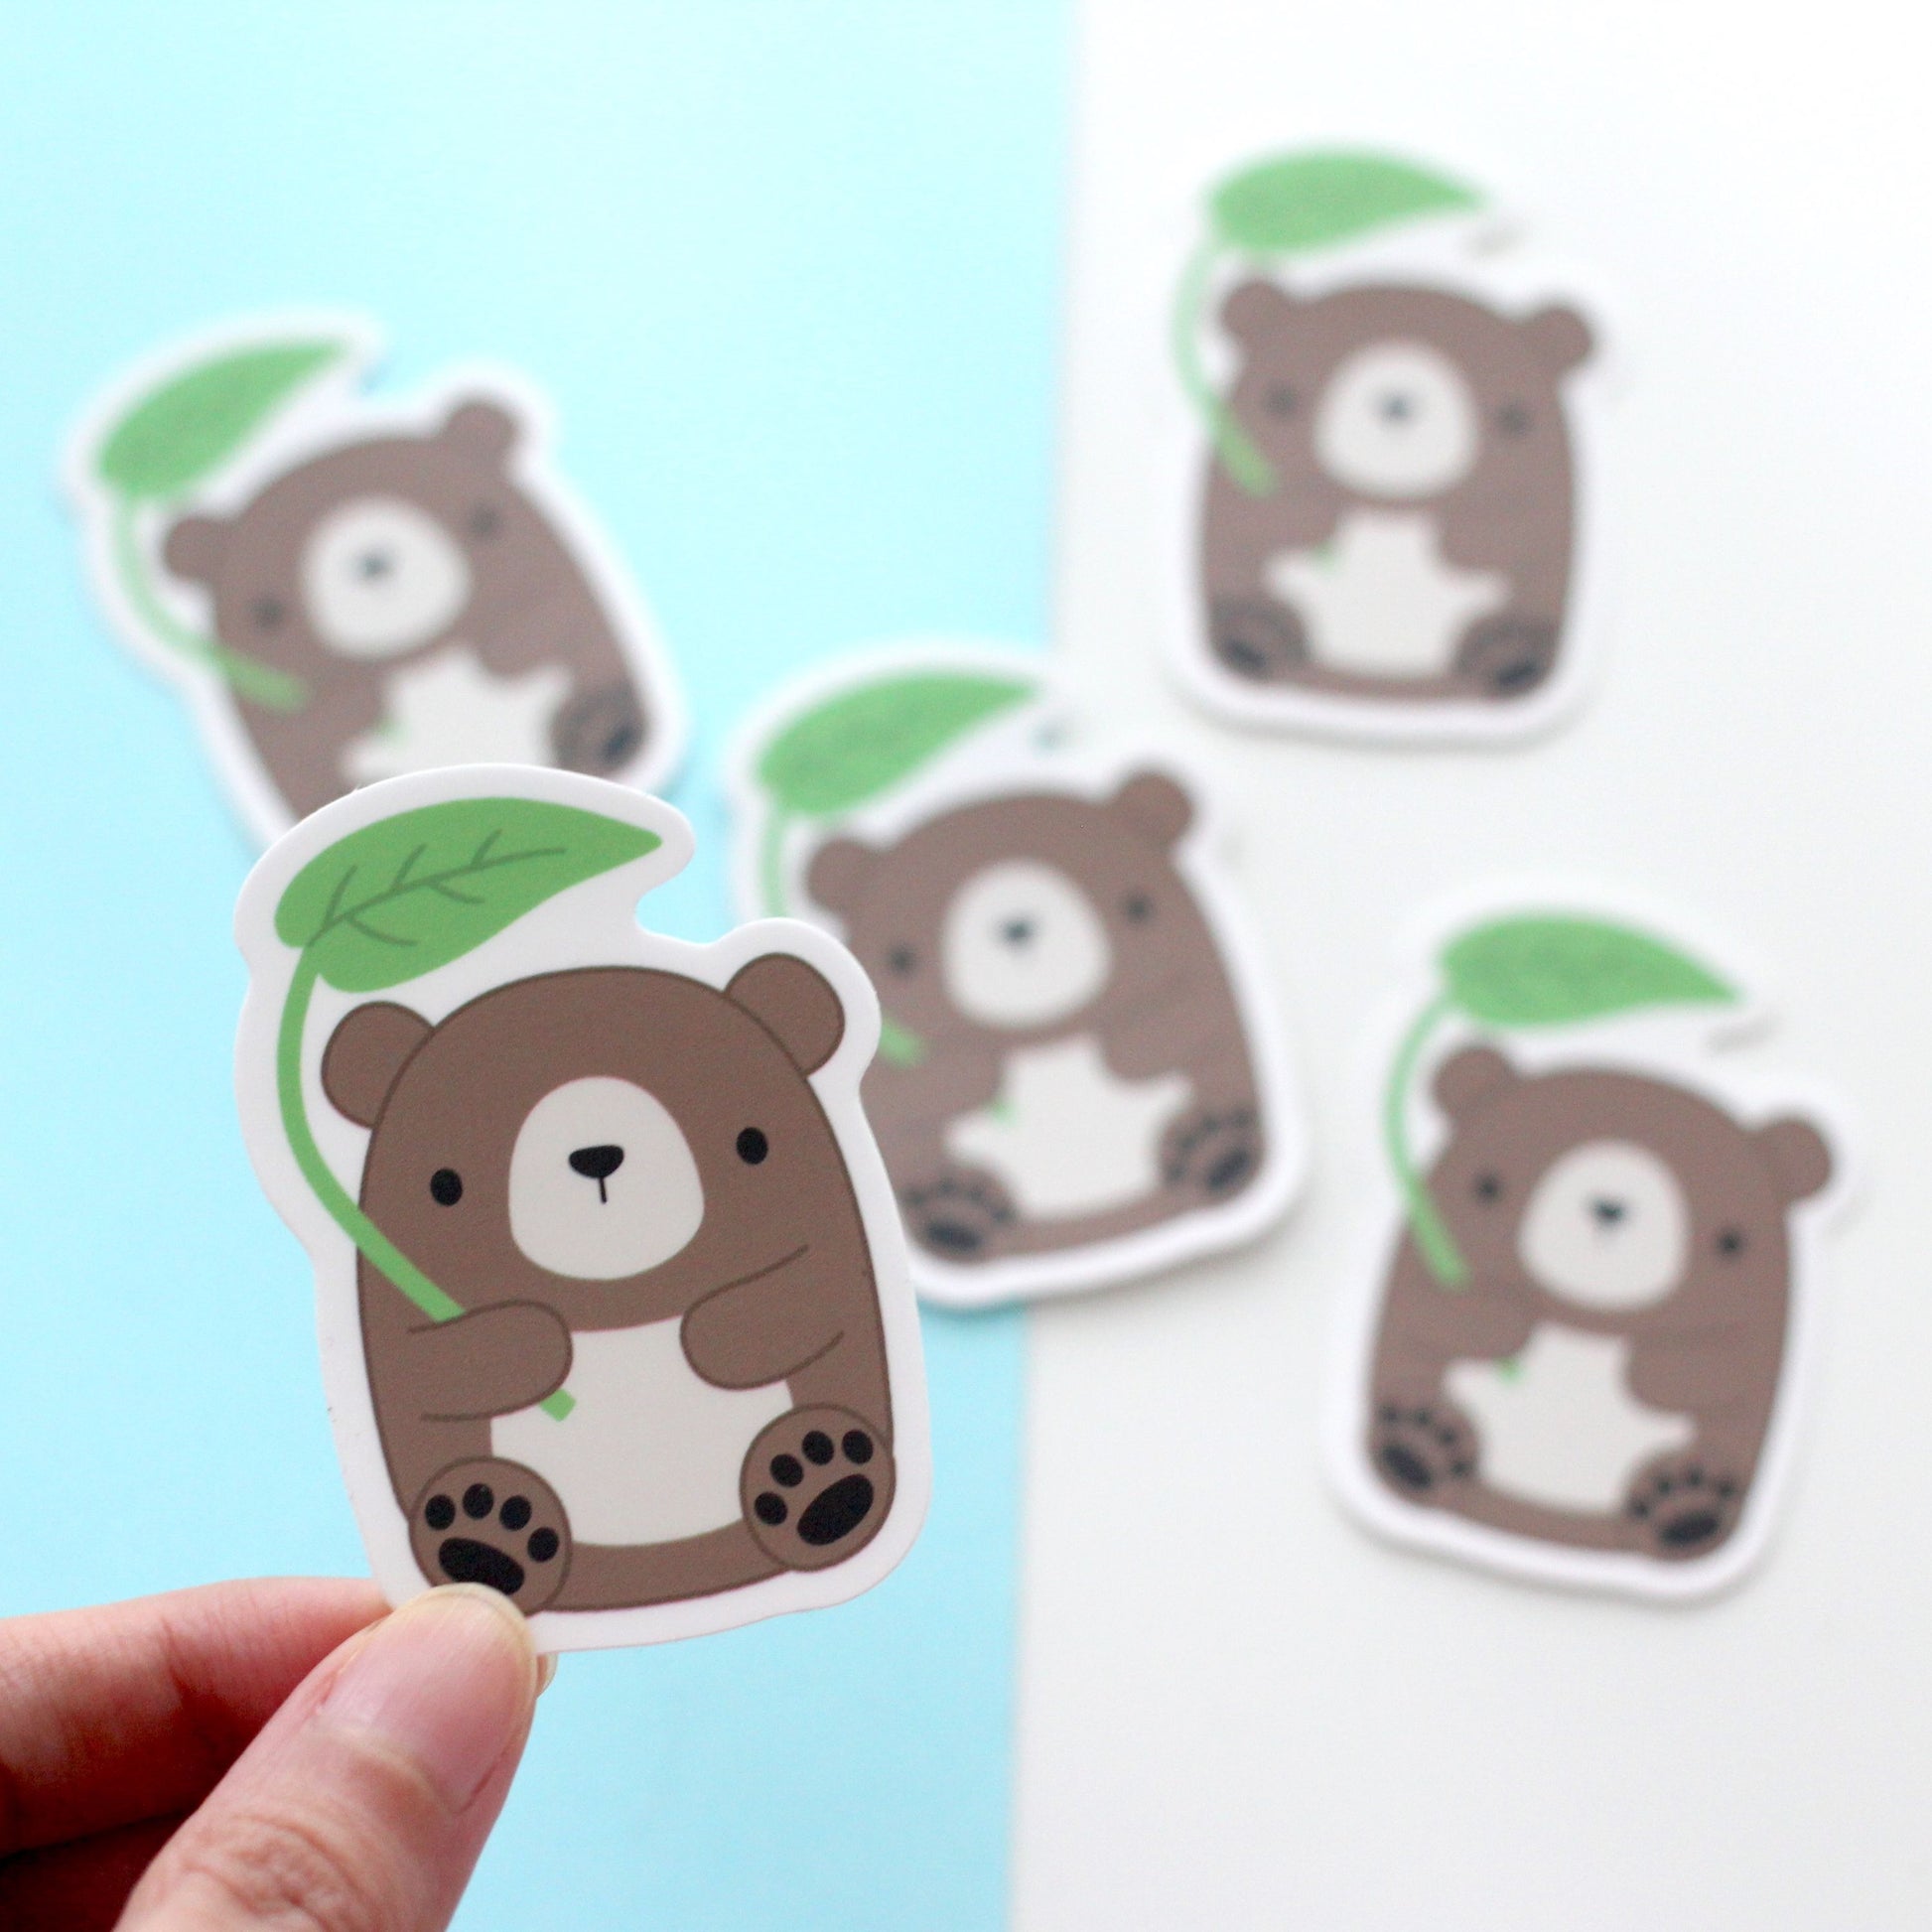 Brown Bear with Leaf Umbrella Vinyl Sticker. Laptop and Phone Decal